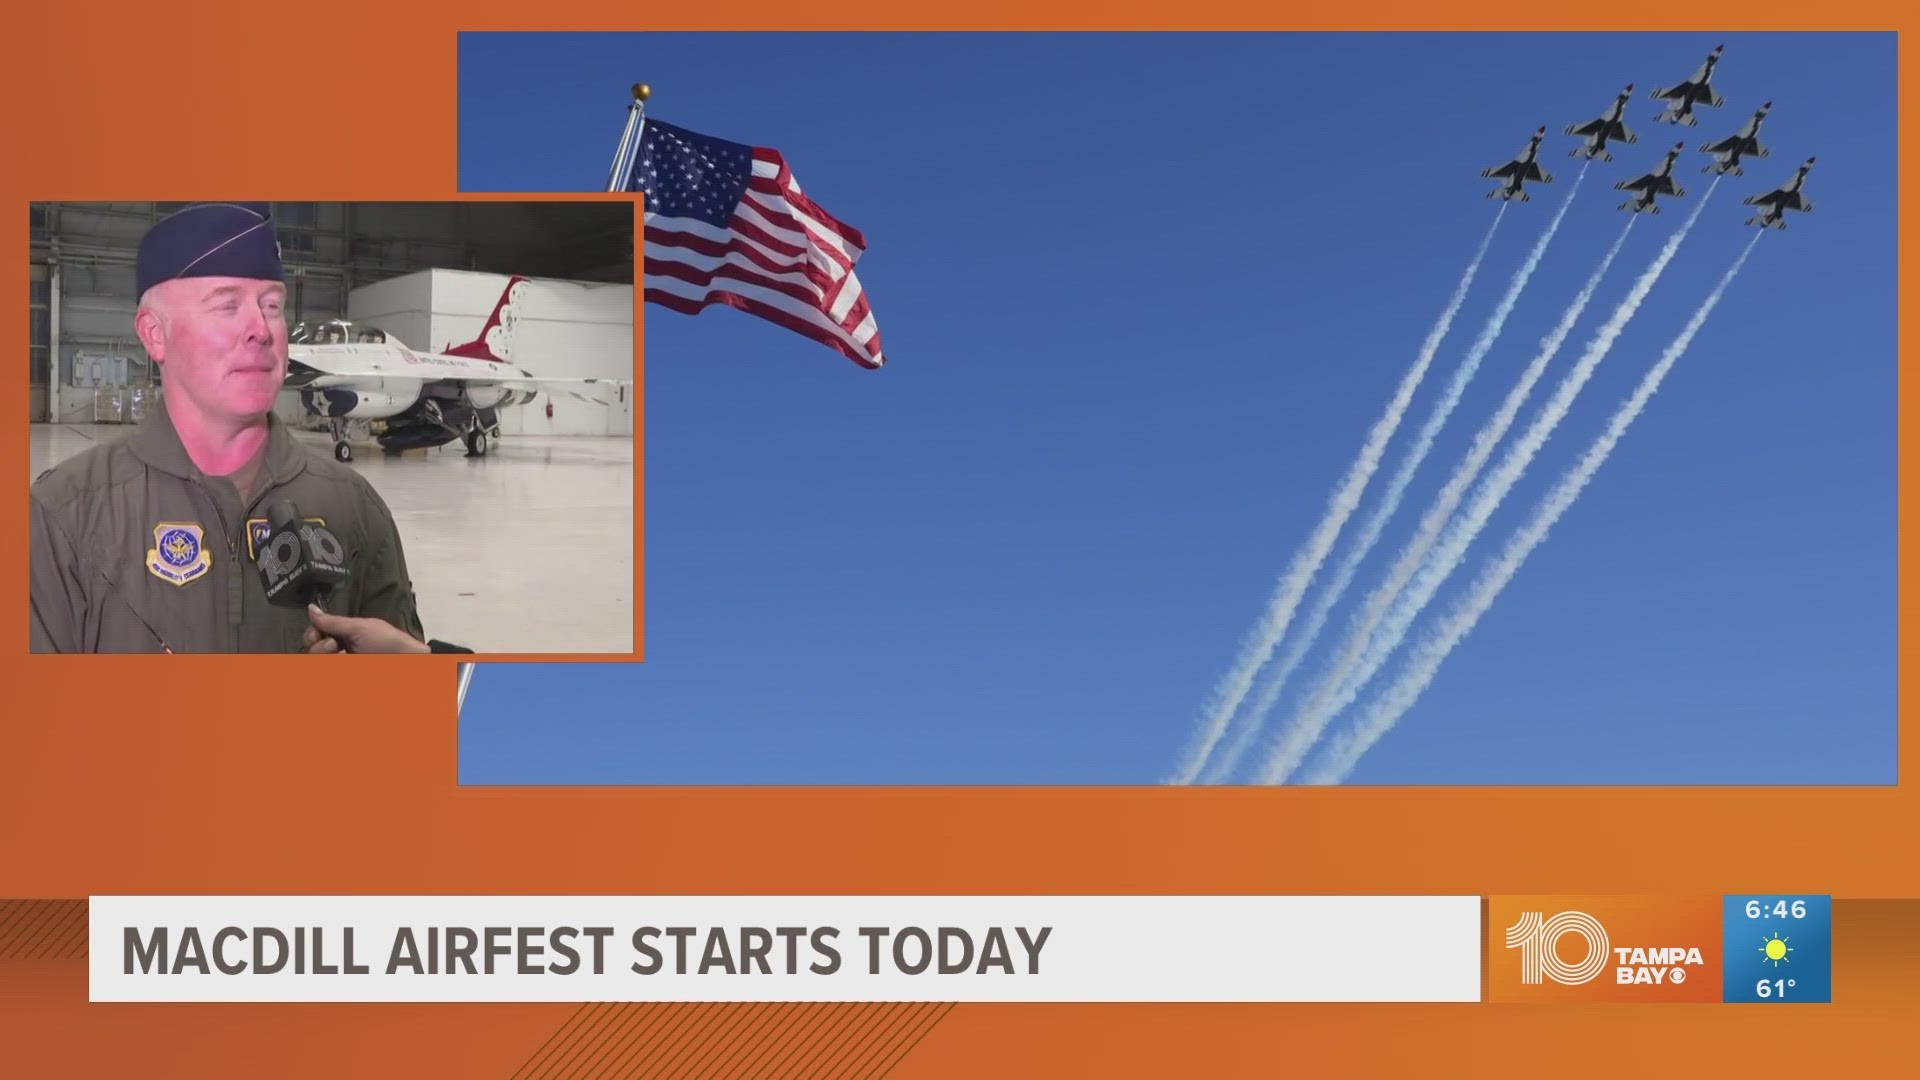 10 Tampa Bay's Jenny Dean spoke with Colonel Adam Bingham about what to expect from this year's AirFest weekend.